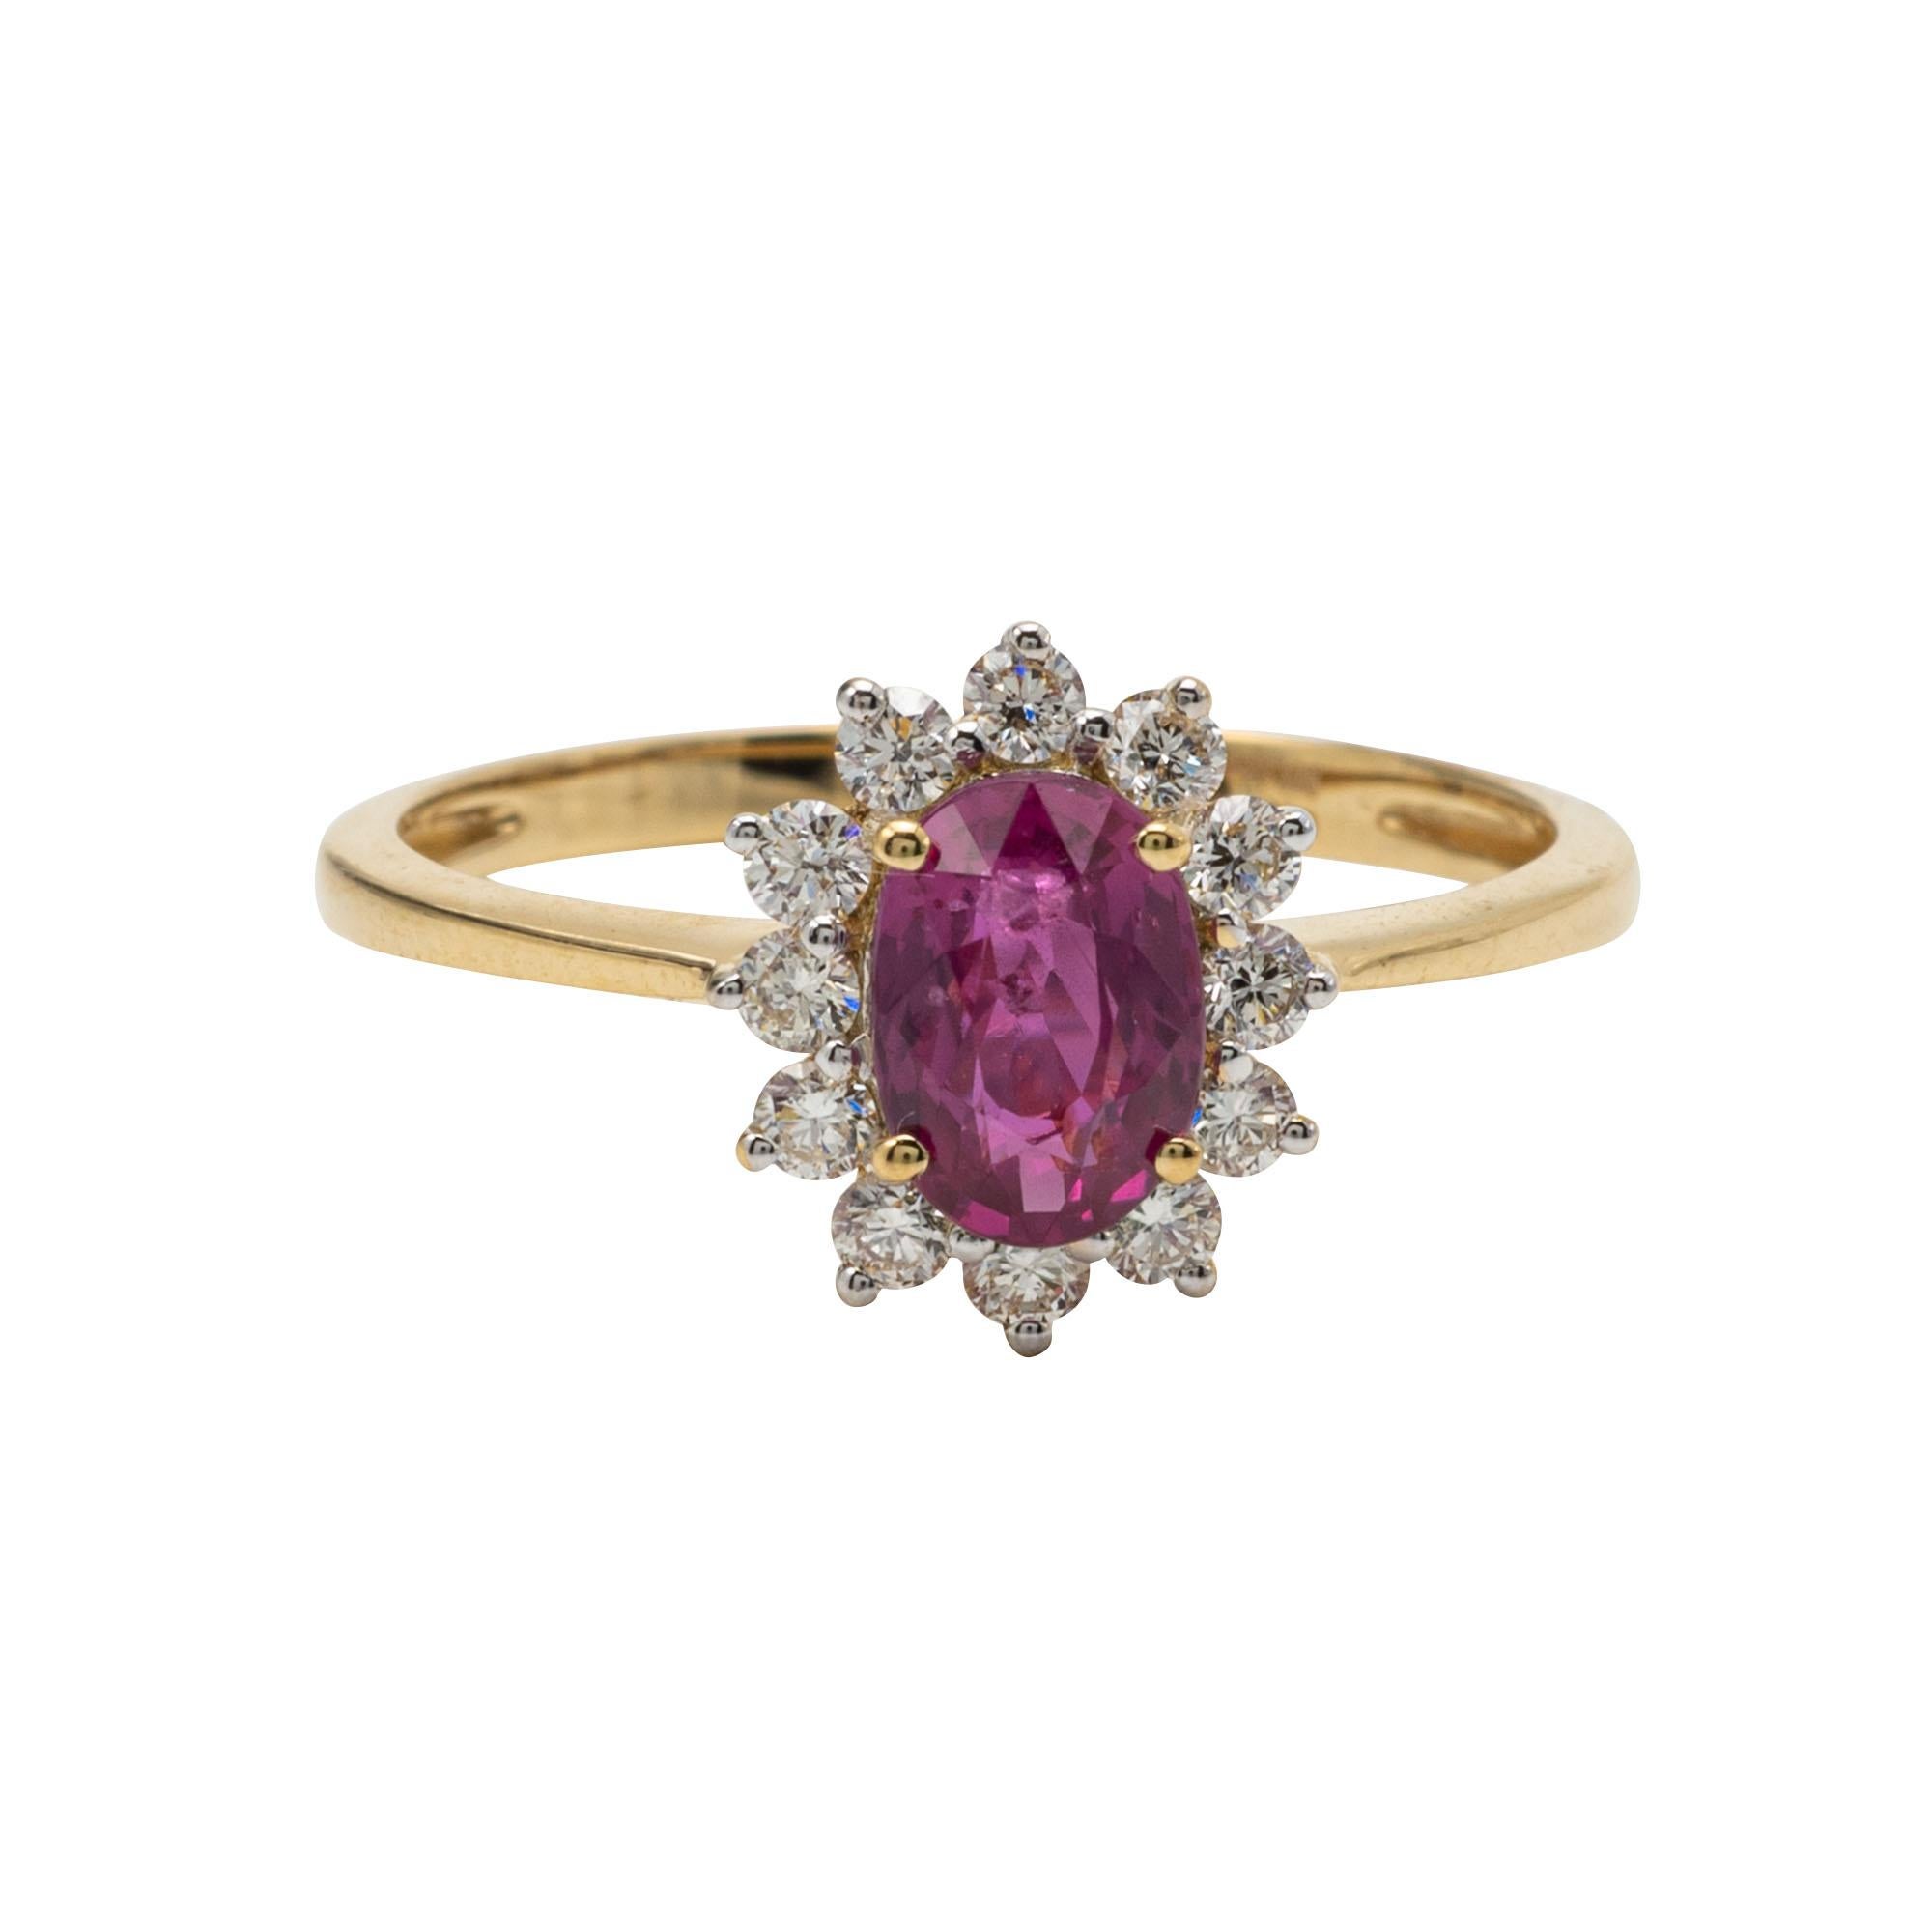 18kt Ruby and Diamond Ring 
Claw-set with an oval-shaped natural ruby weighing approximately 0.32 carats, surrounded by round brilliant-cut diamonds weighing approximately 0.32 carats, Size 7 1/4. 
Accompanied by GIA report 2213443826